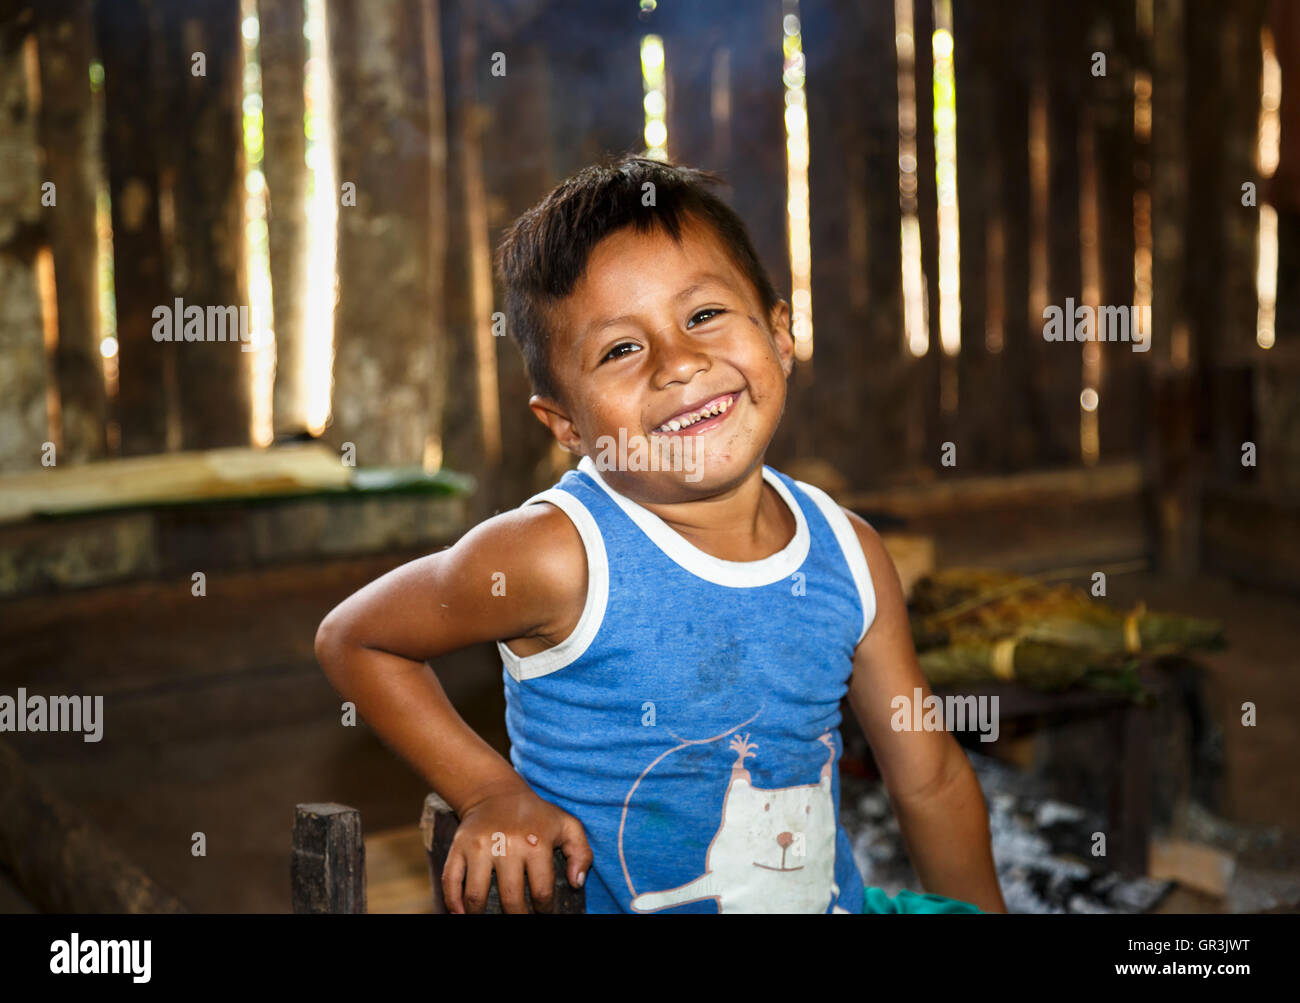 Young local native boy in the Pilchi Community on the Napo River (an Amazon tributary), Ecuador, South America, smiling Stock Photo